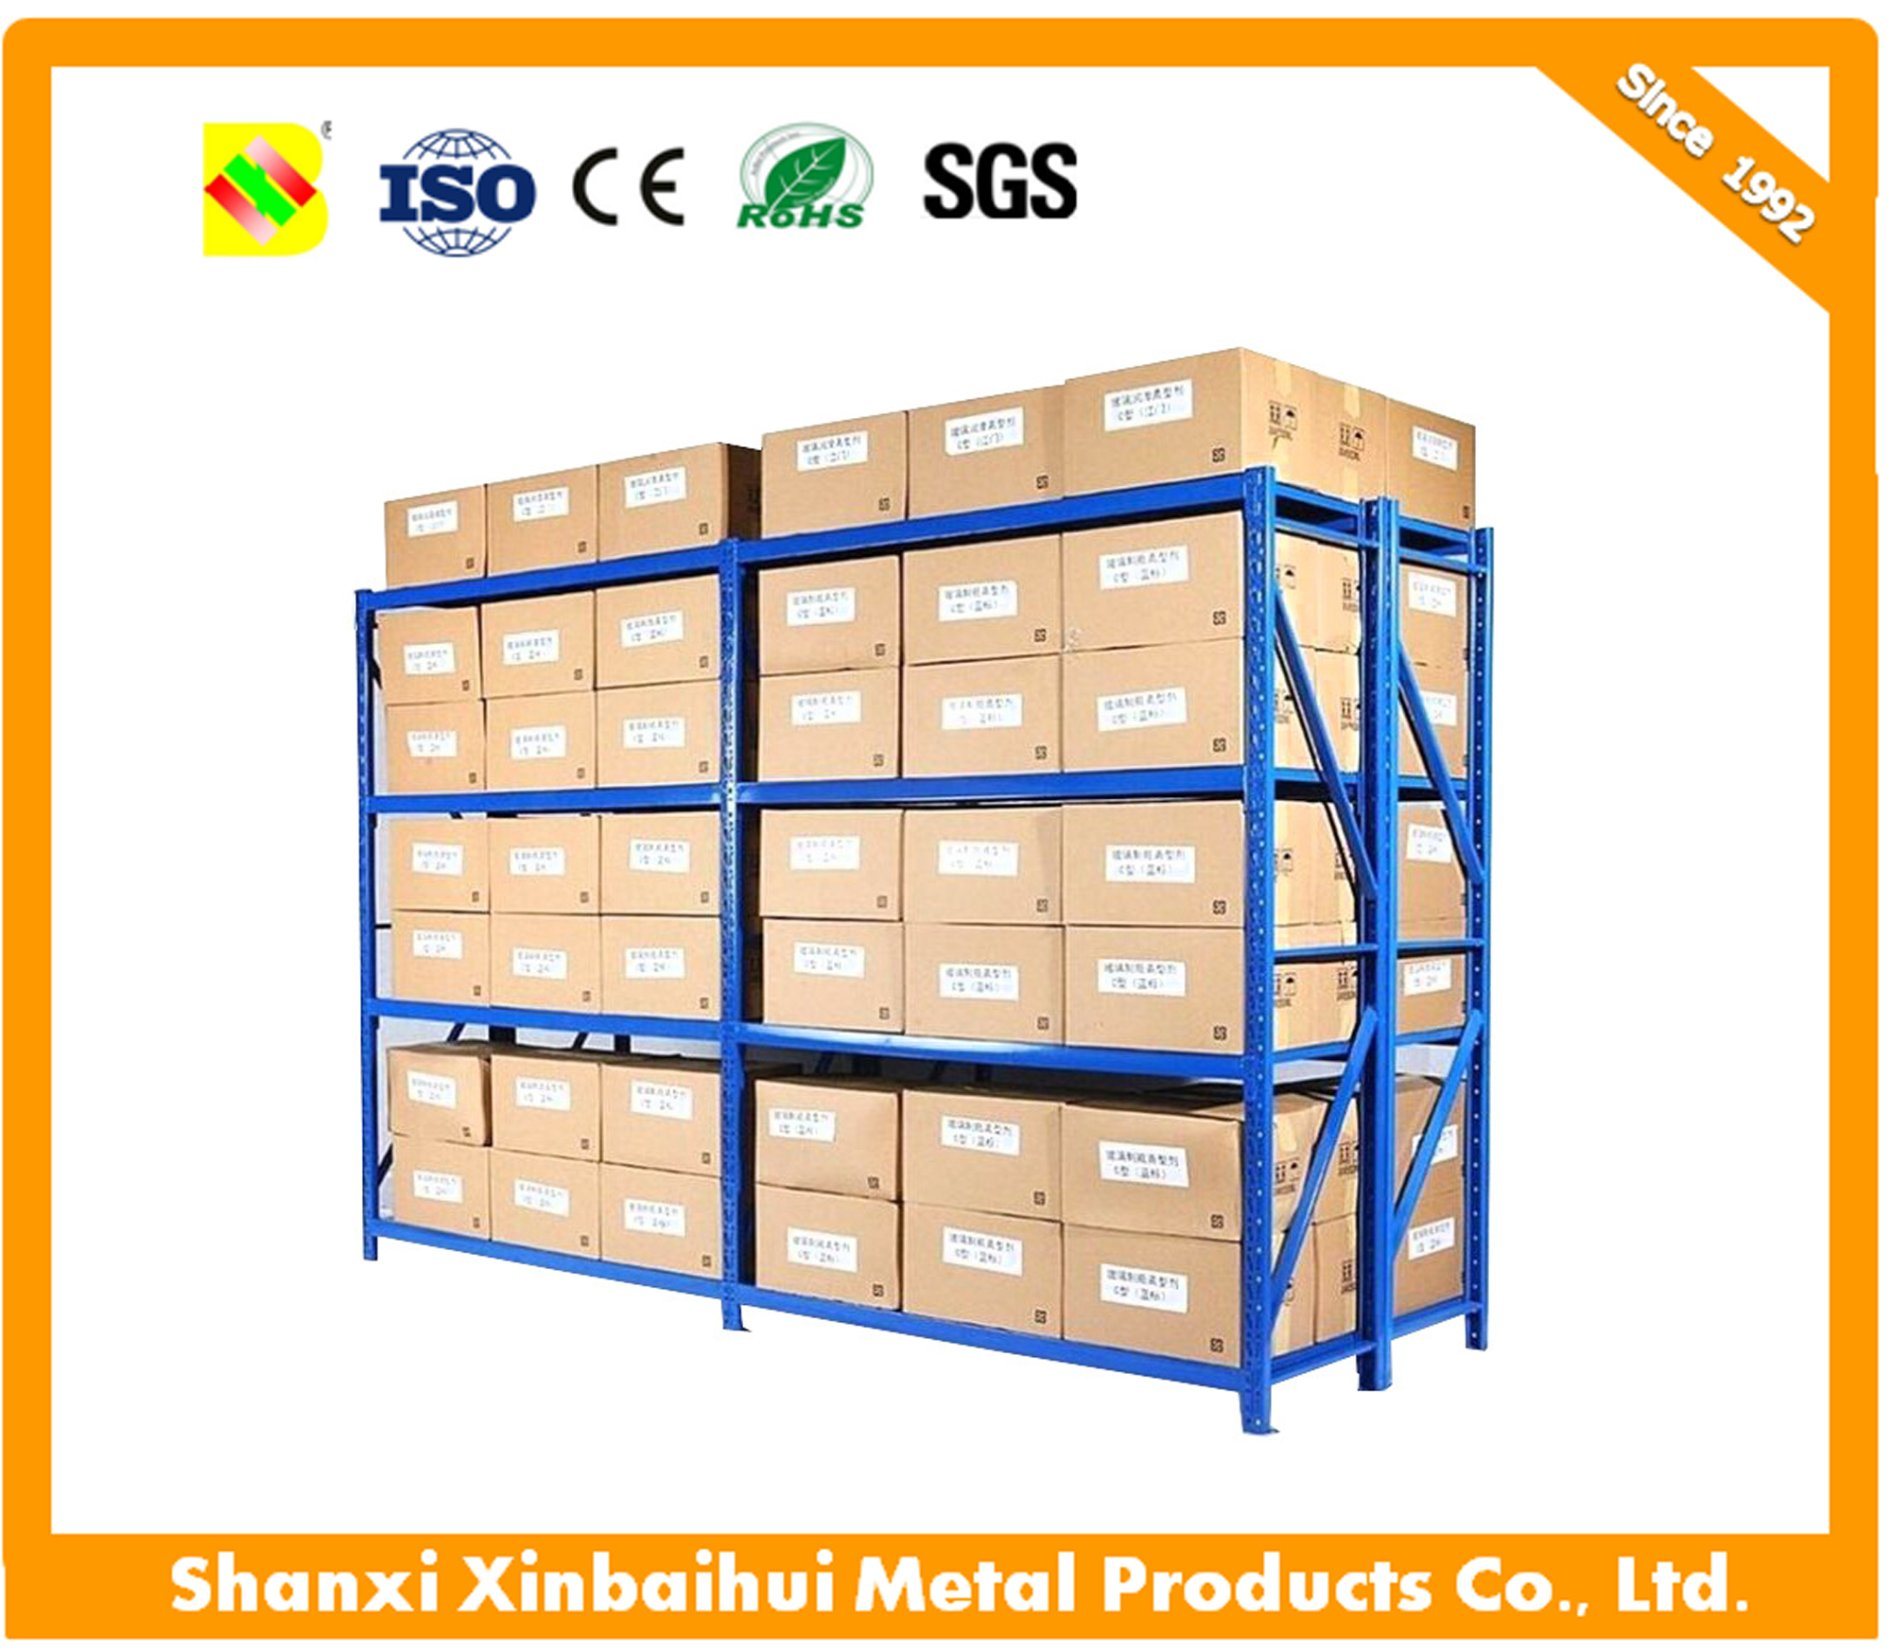 Midium-Duty Storage Shelf and Pallet Rack with 300kg Load Capacity, Customized Sizes Are Available